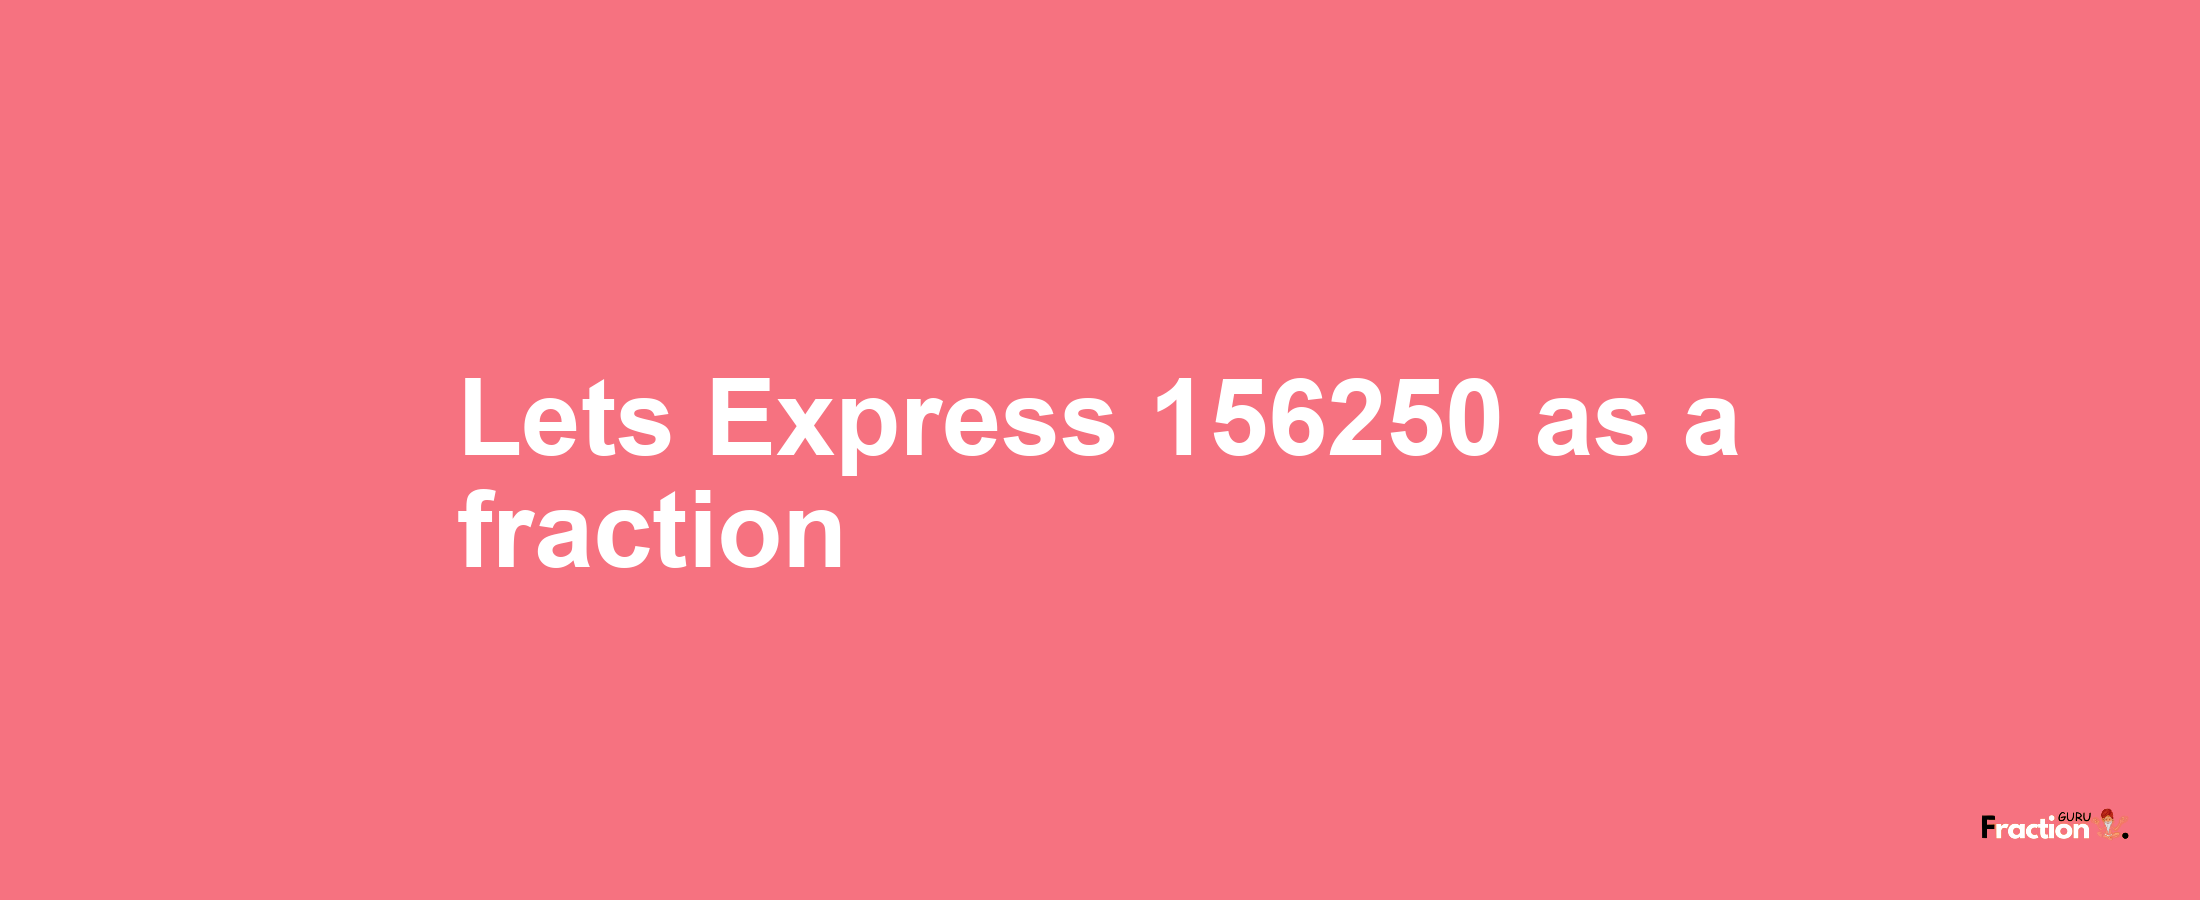 Lets Express 156250 as afraction